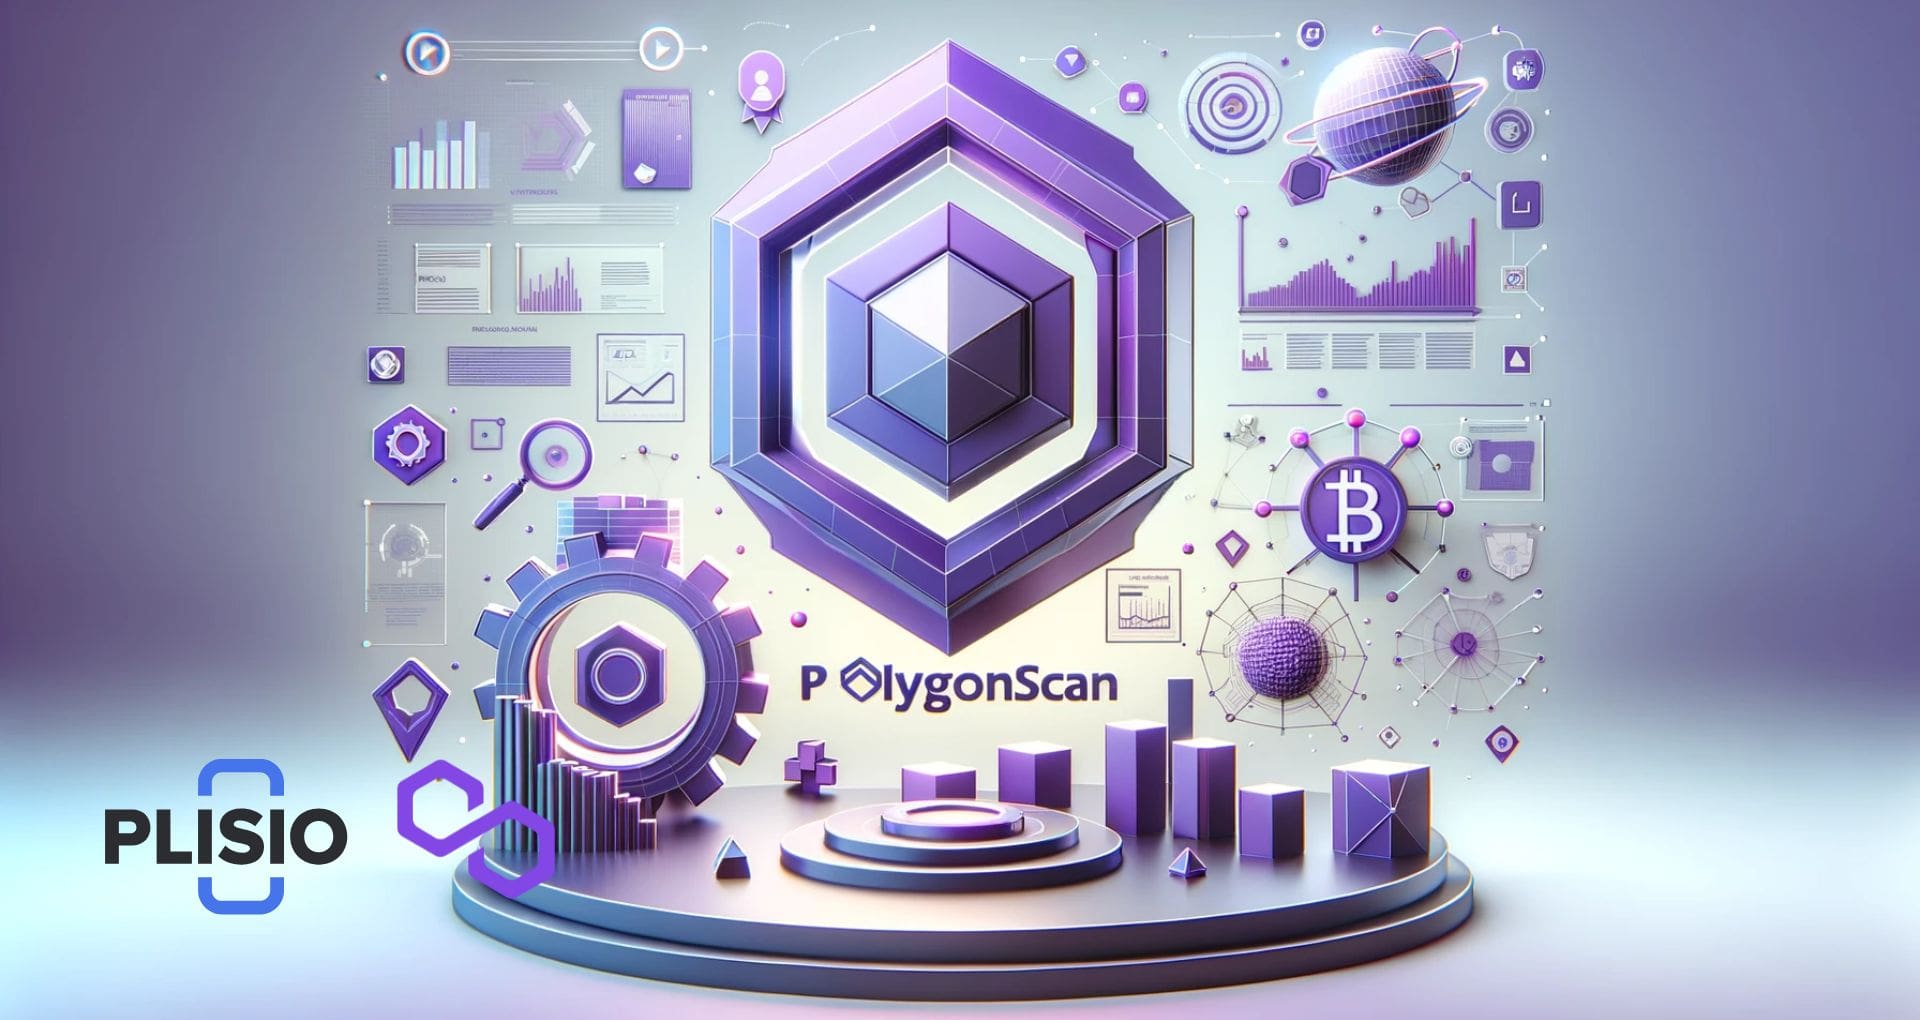 Polygonscan: What It Is and How To Use It